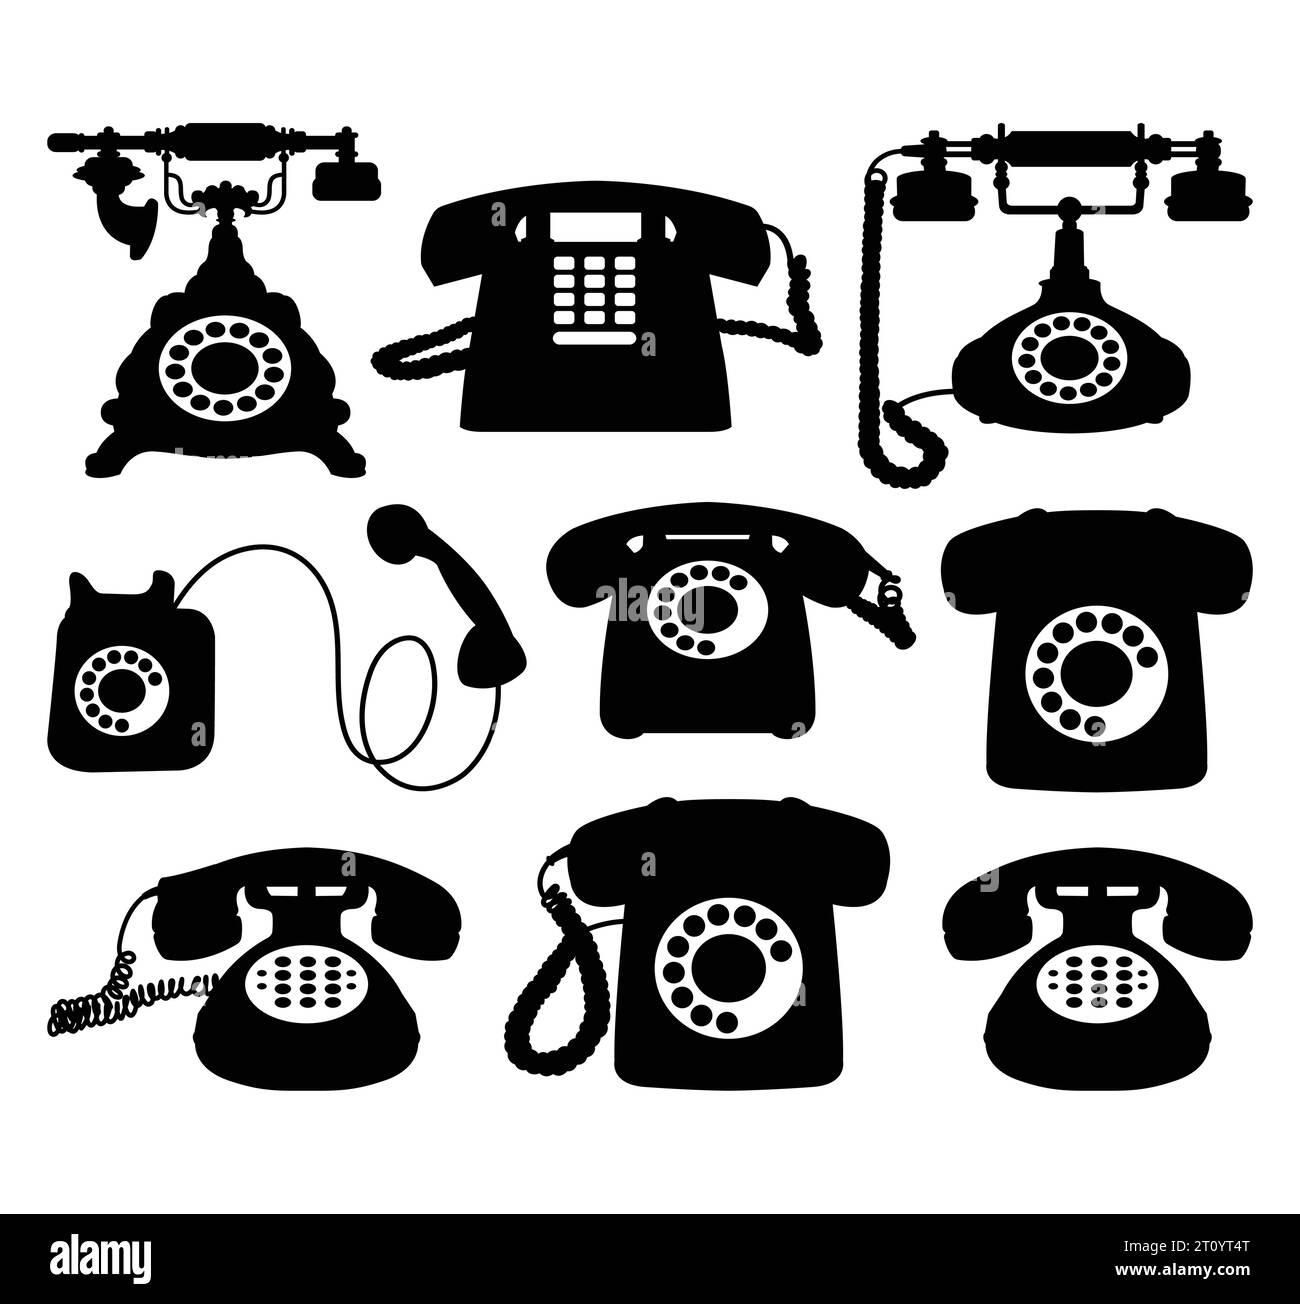 Telephone telecommunication tool object silhouette Stock Vector